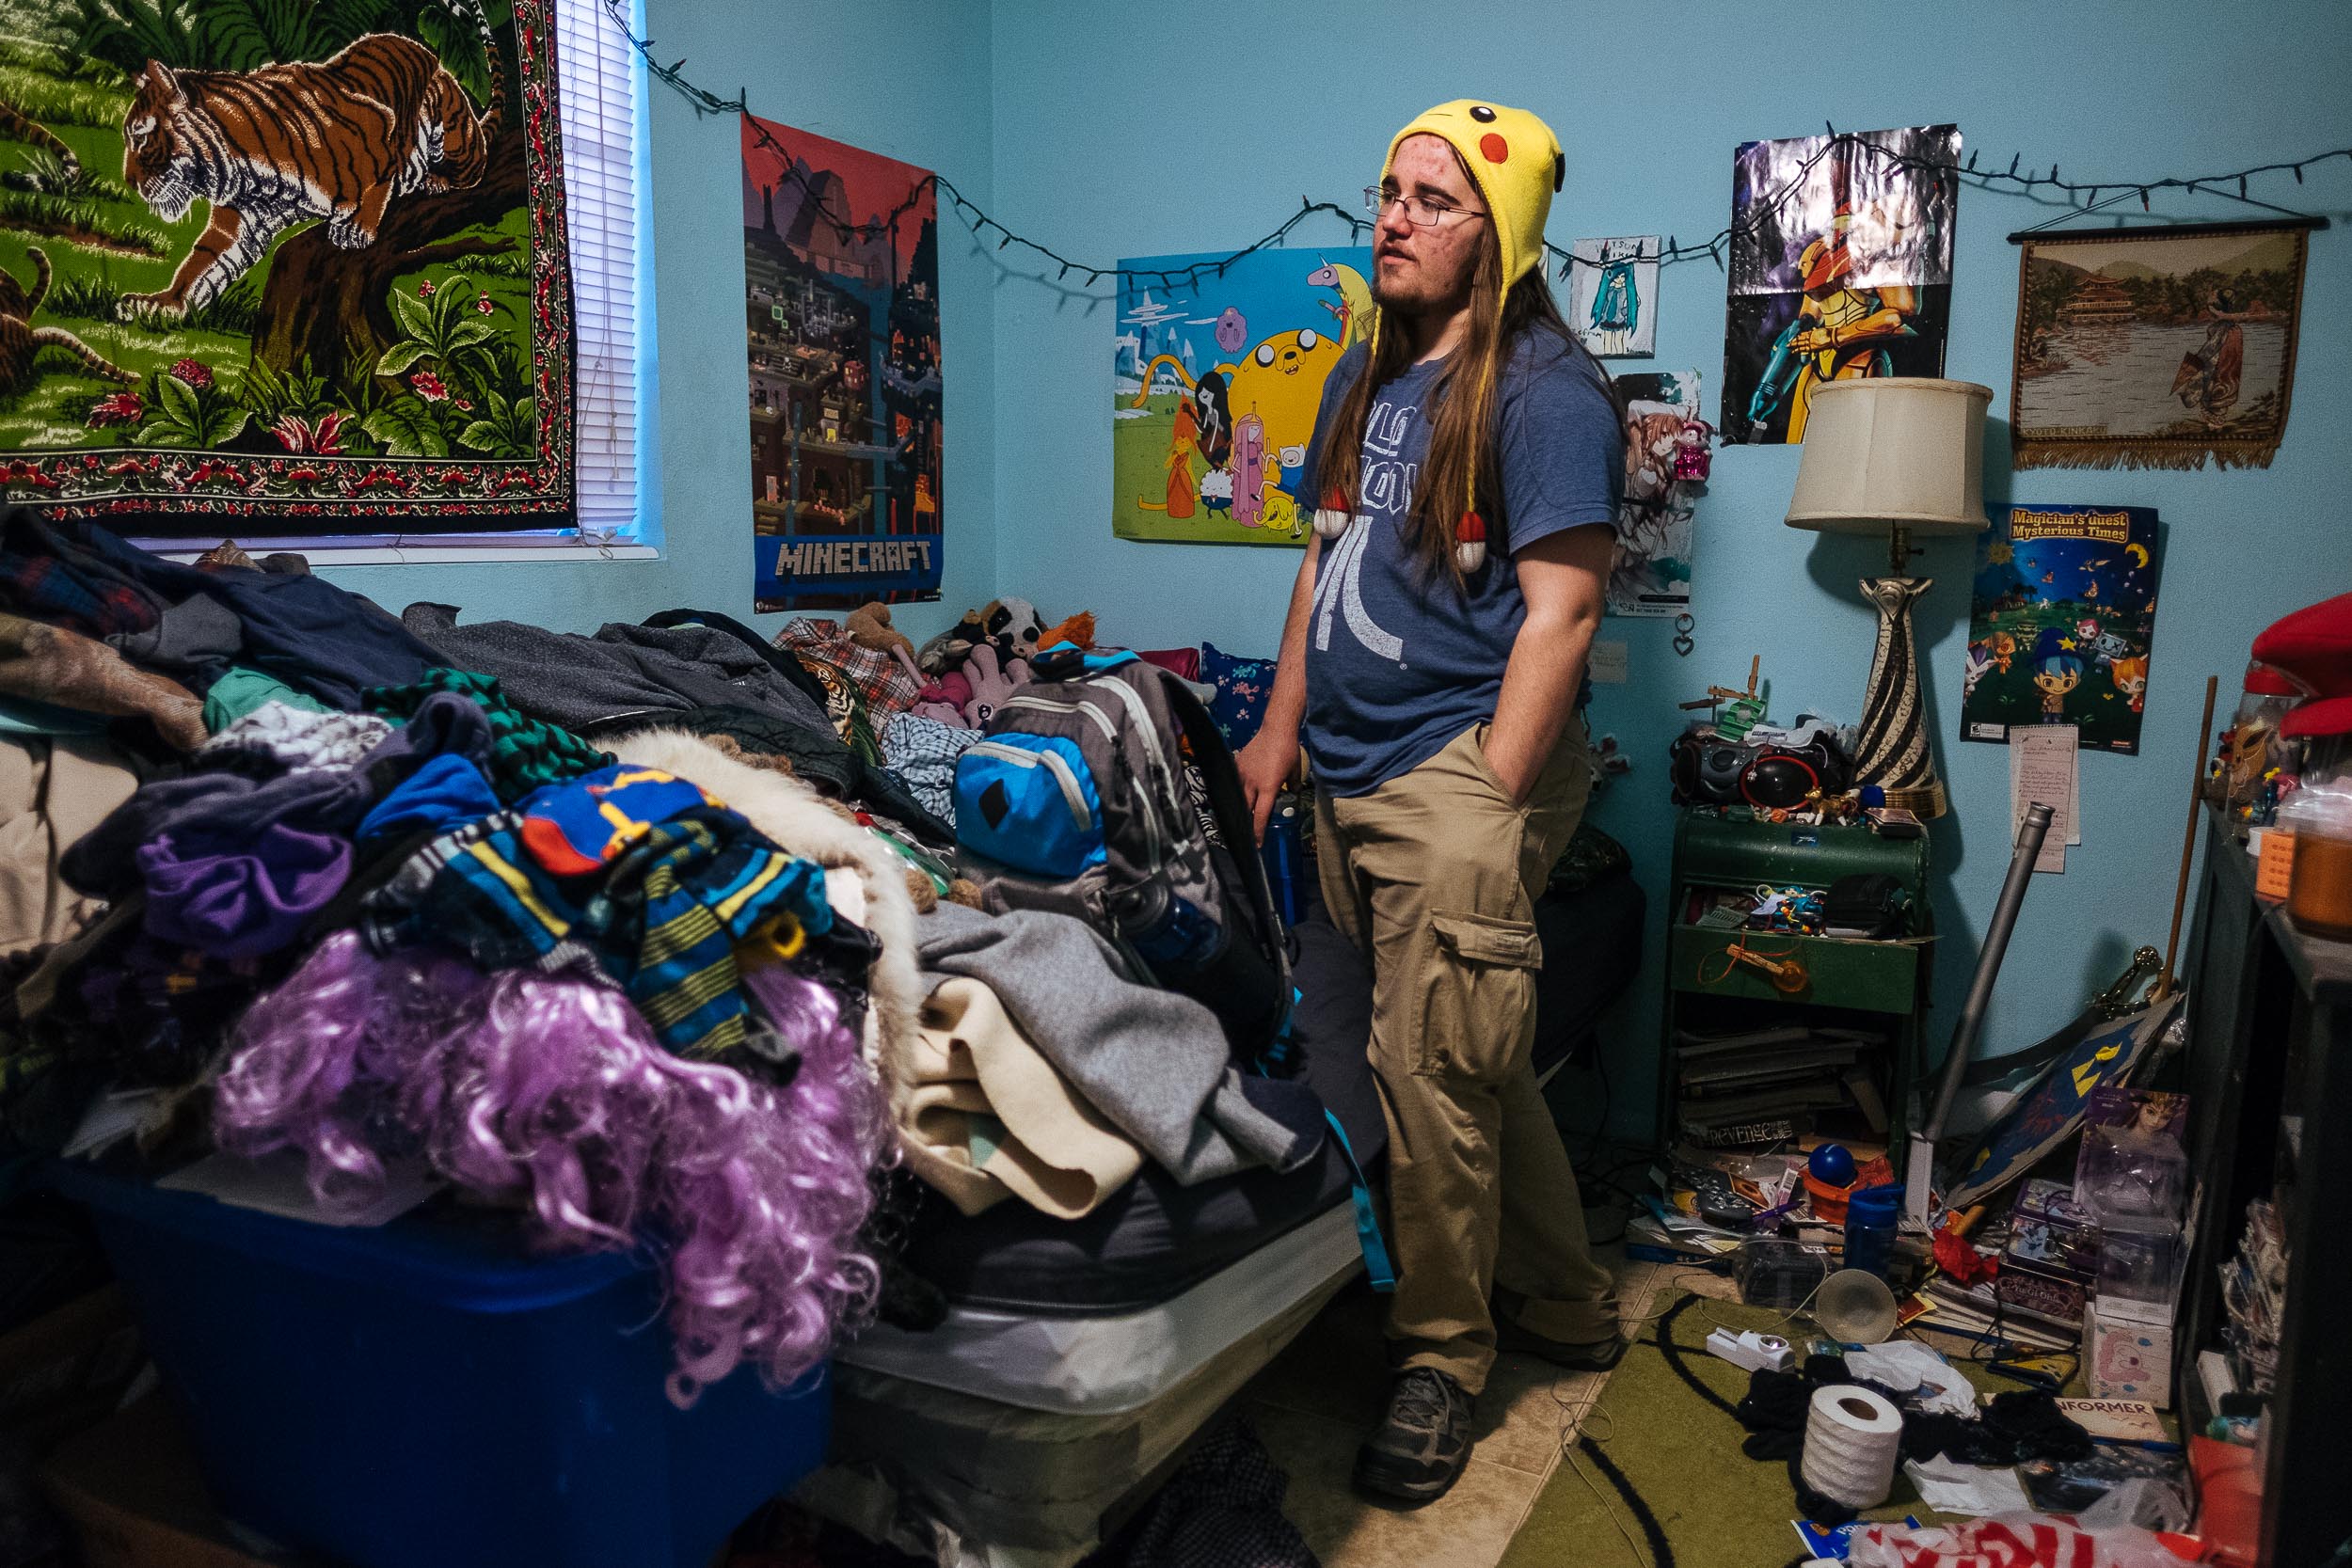  Jenny's son, Zefram, in his bedroom. Zefram is a senior in high school. Despite requiring some special attention scholastically and needing help with navigating change, Jenny describes Zefram as smart and funny.&nbsp;She says Zefram is a good person